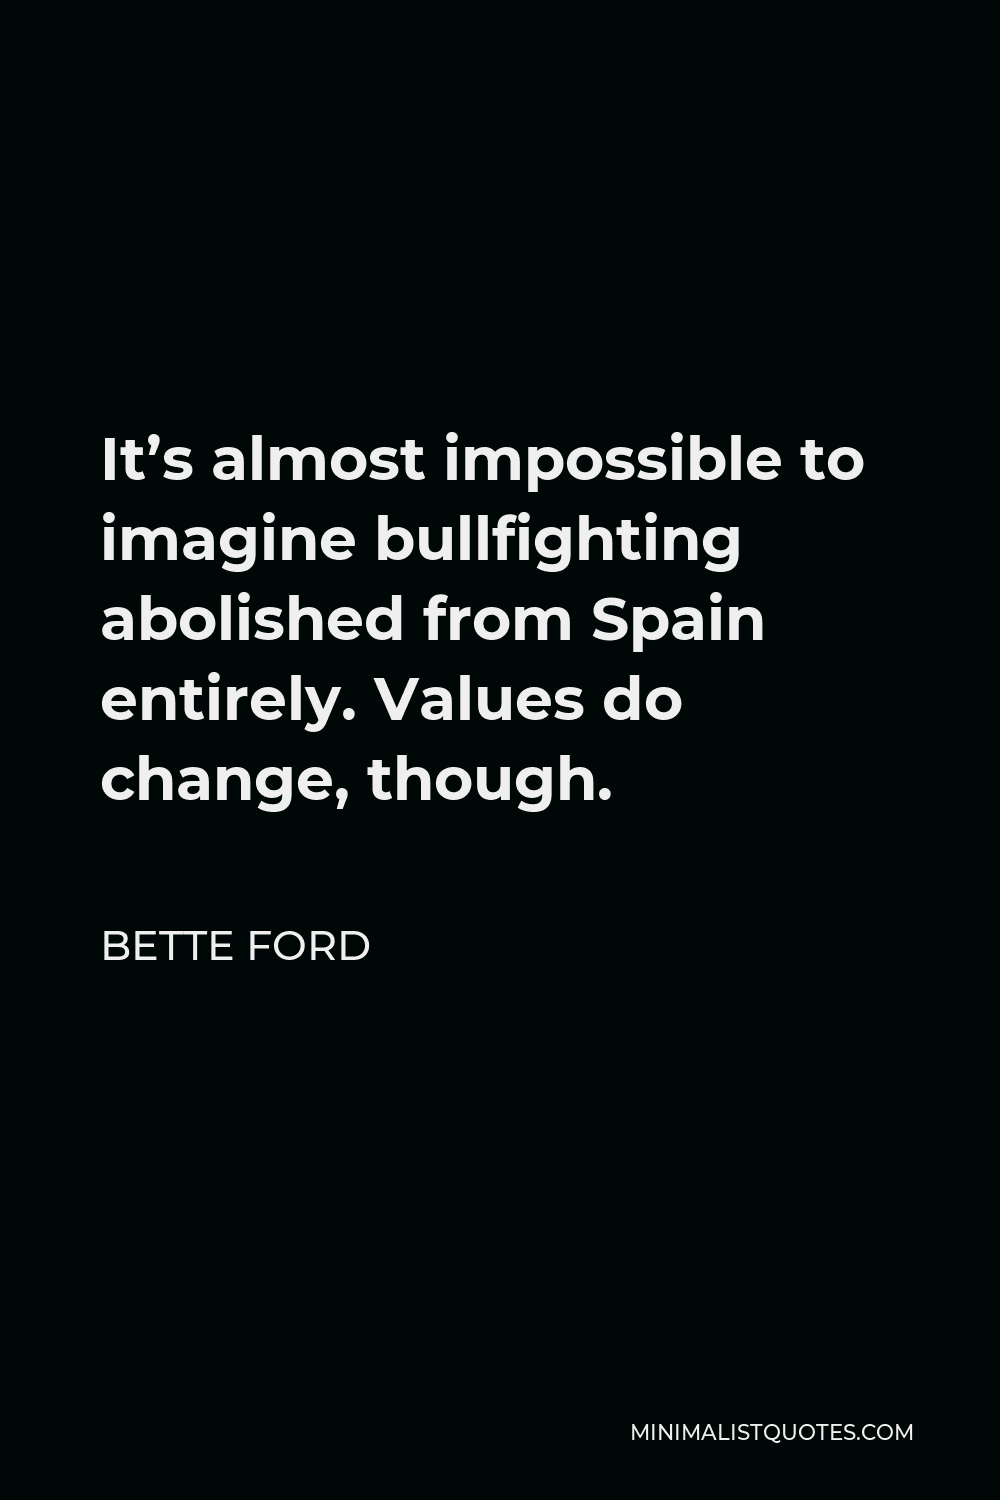 Bette Ford Quote - It’s almost impossible to imagine bullfighting abolished from Spain entirely. Values do change, though.